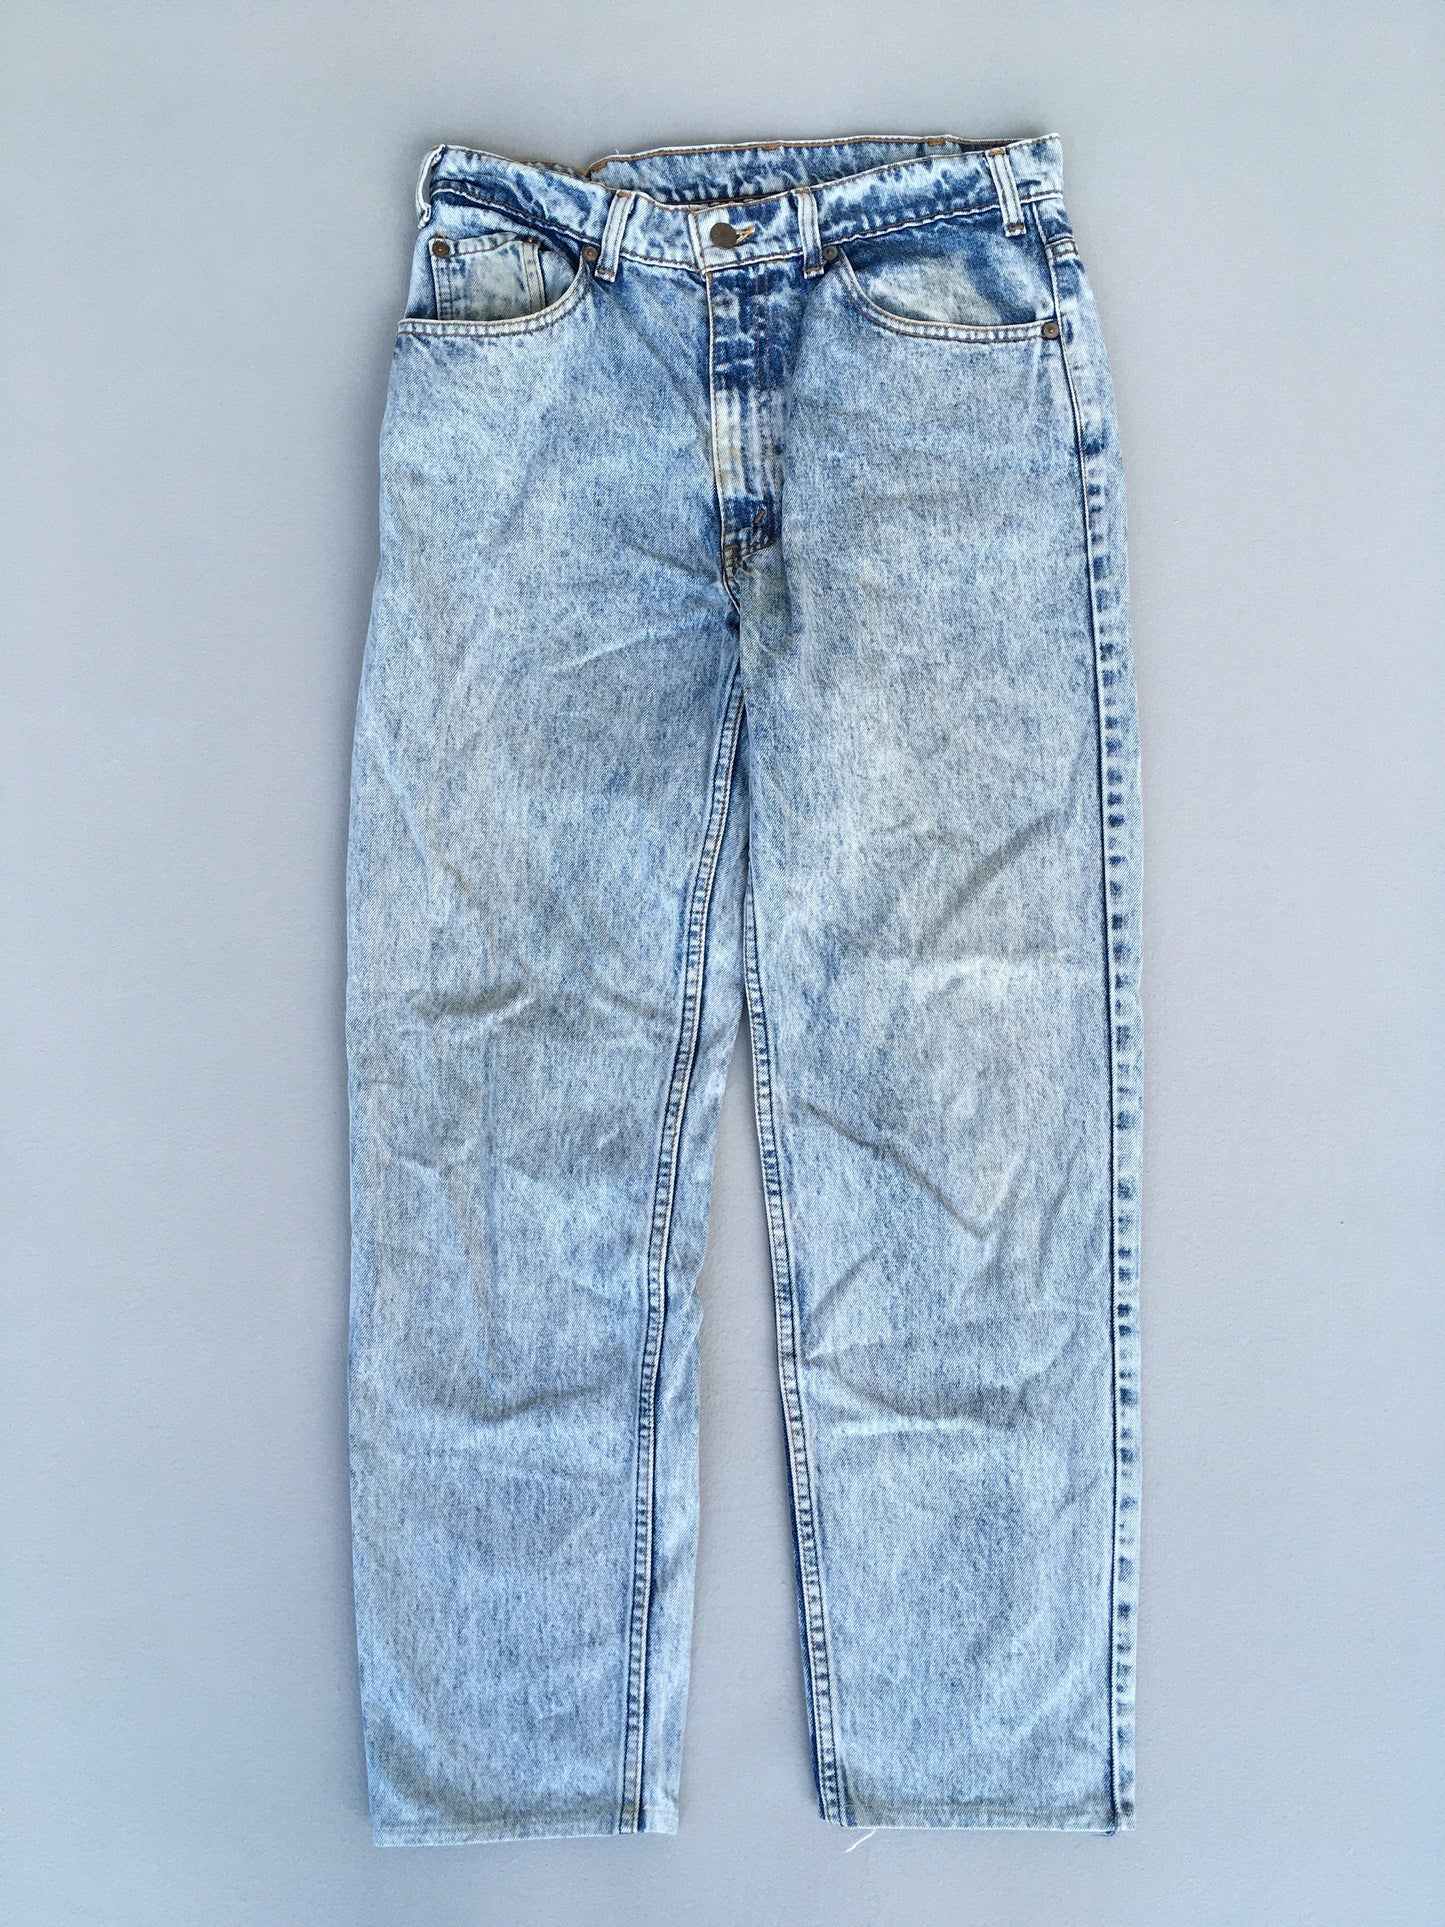 Size 30x27.5 Levi's 626 Faded Blue Jeans High Waisted